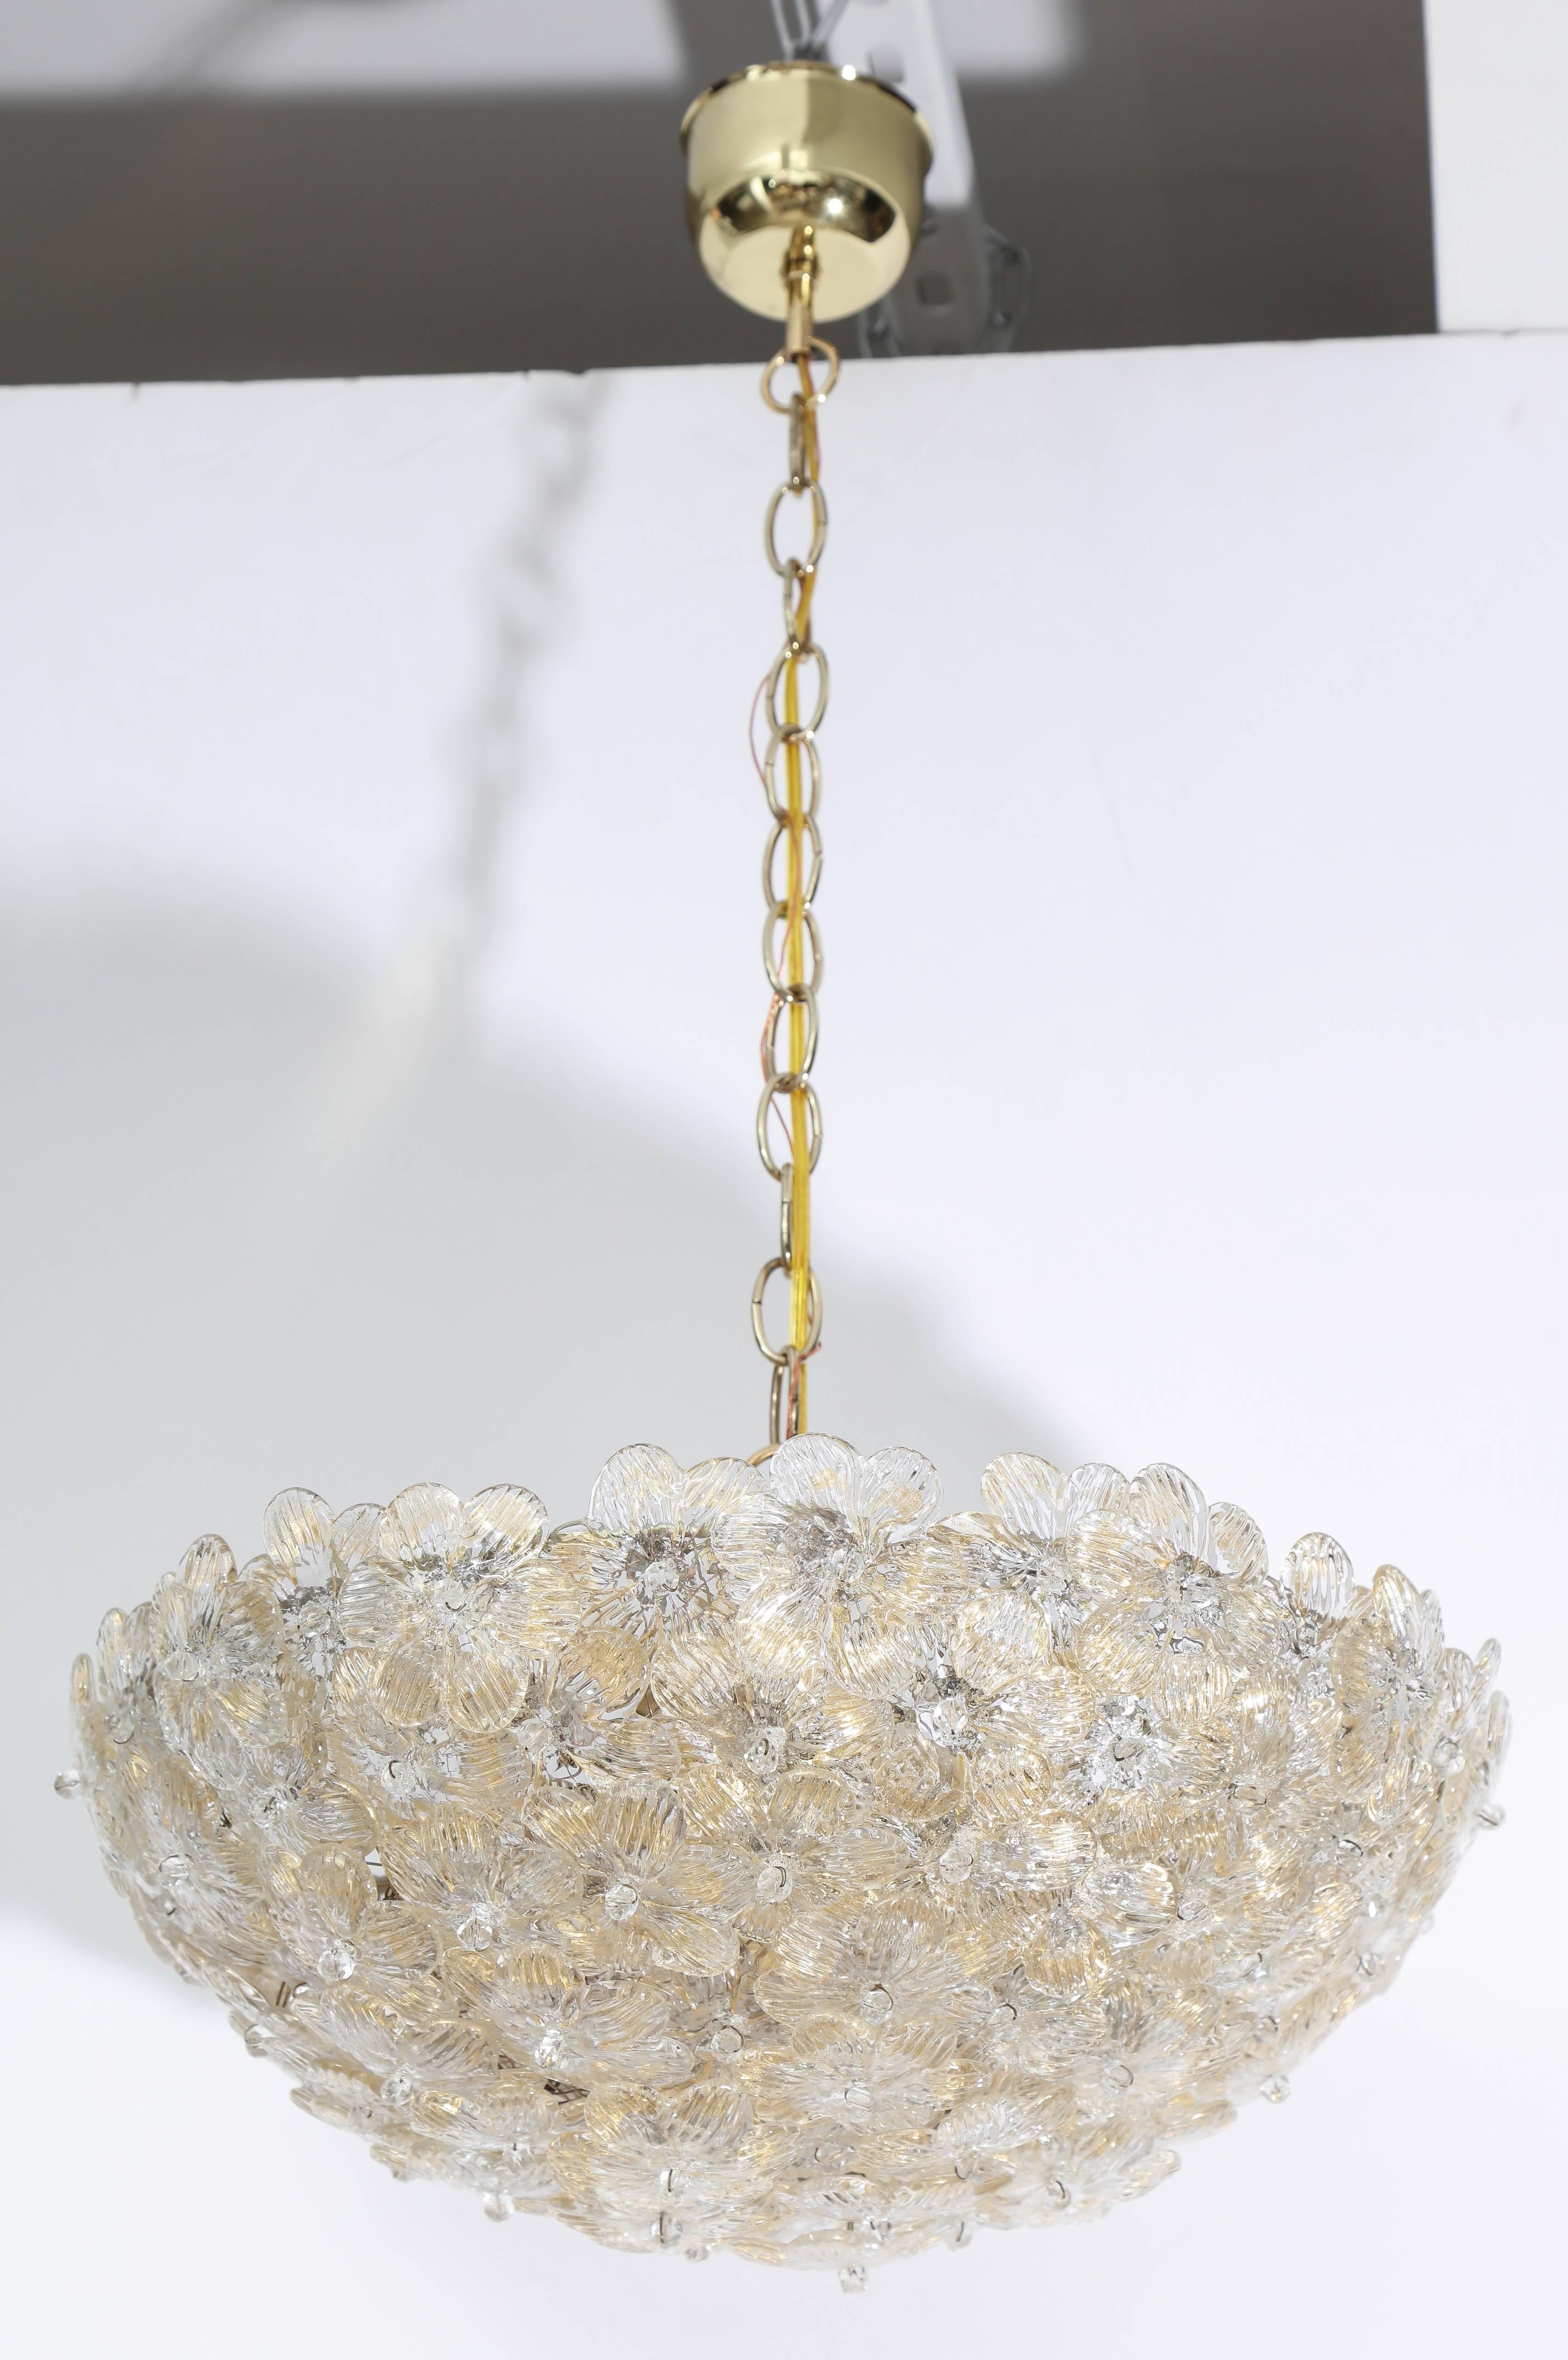 Italian Mid-Century classic chandelier composed of overlapping Murano glass flower elements with a slight gold sprinkling throughout the glass, suspended from a brass chain and canopy. Uses three bubs, newly rewired for US standards. Chandelier